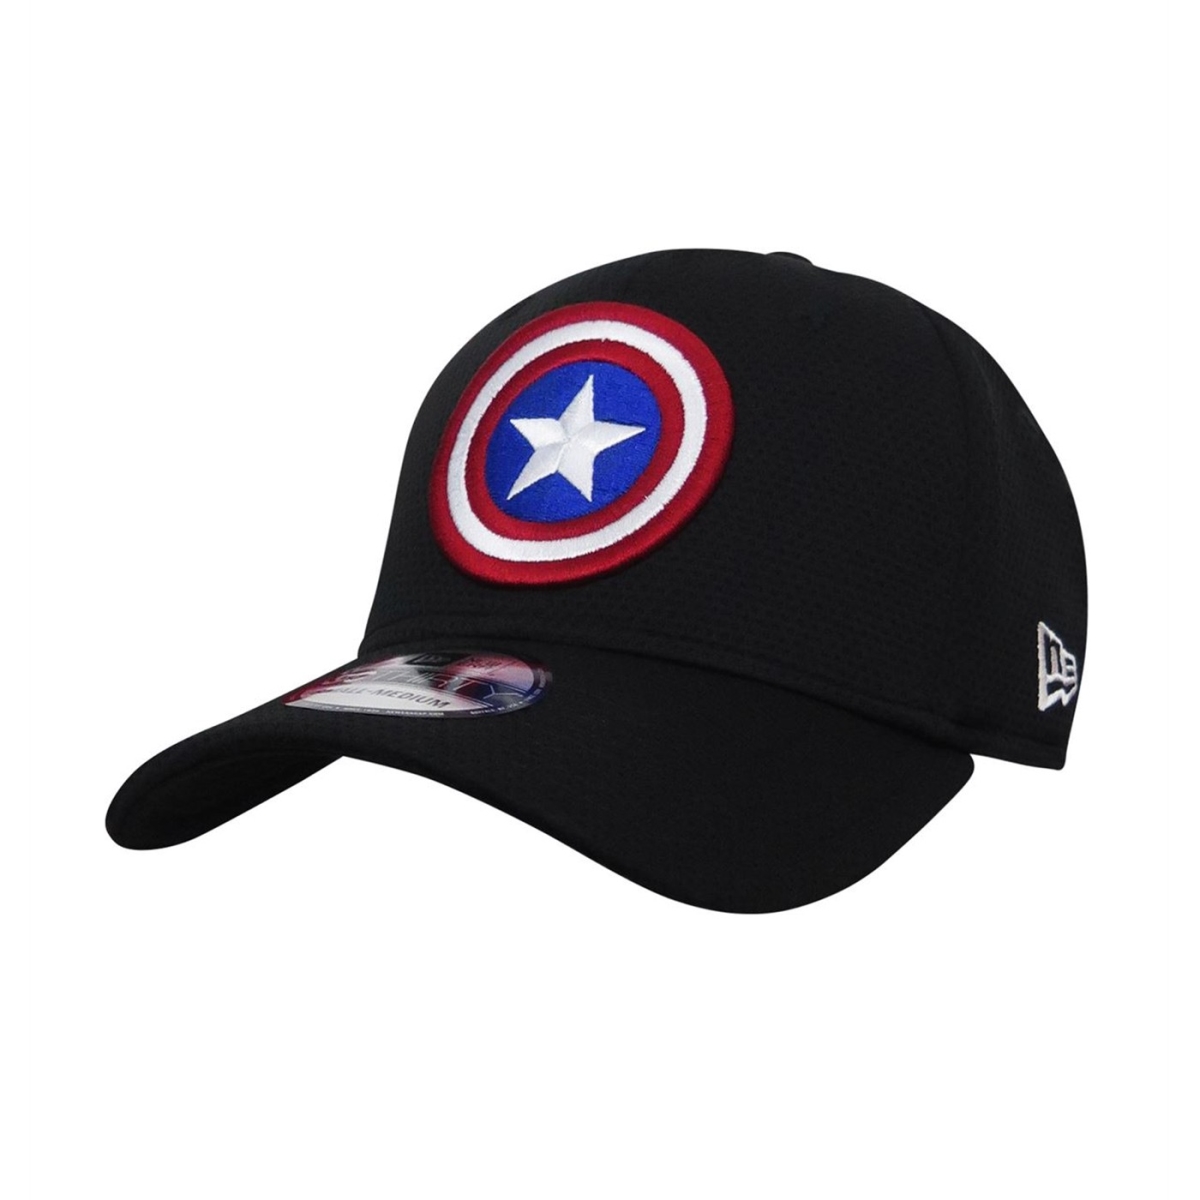 Picture of Captain America capcapshldblk39-m-l-Medium-Large Captain America Shield Black 39 Thirty Fitted Hat - Medium & Large